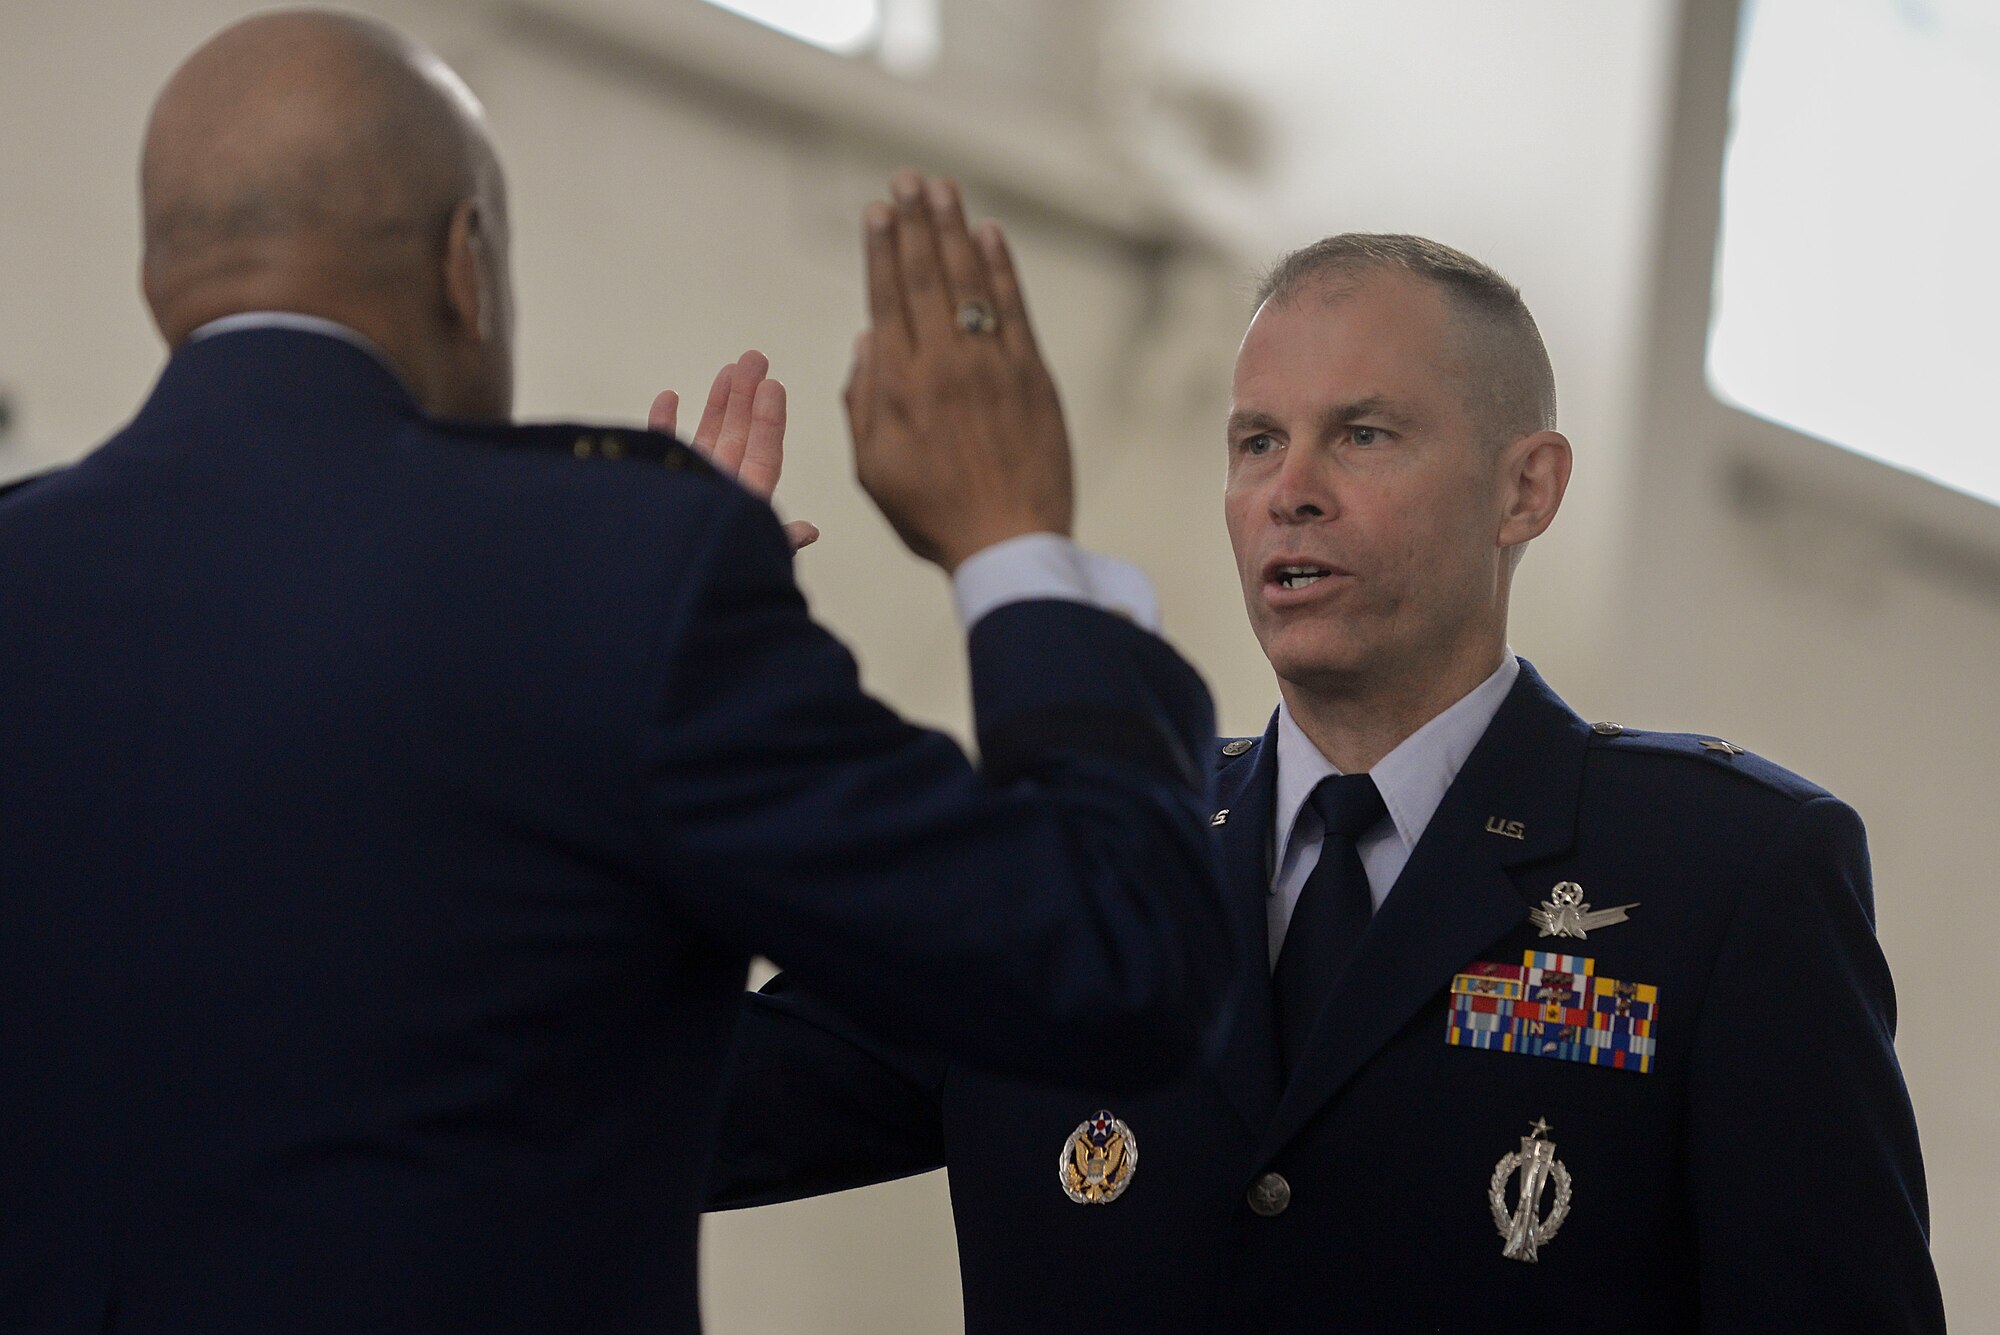 Brig. Gen. Michael Lutton recites the oath of enlistment during his promotion ceremony to brigadier general at Minot Air Force Base, N.D., June 17, 2016. Lutton recently relinquished command of the 91st Missile Wing to Col. Colin Connor. (U.S. Air Force photo/Airman 1st Class Jessica Weissman) 